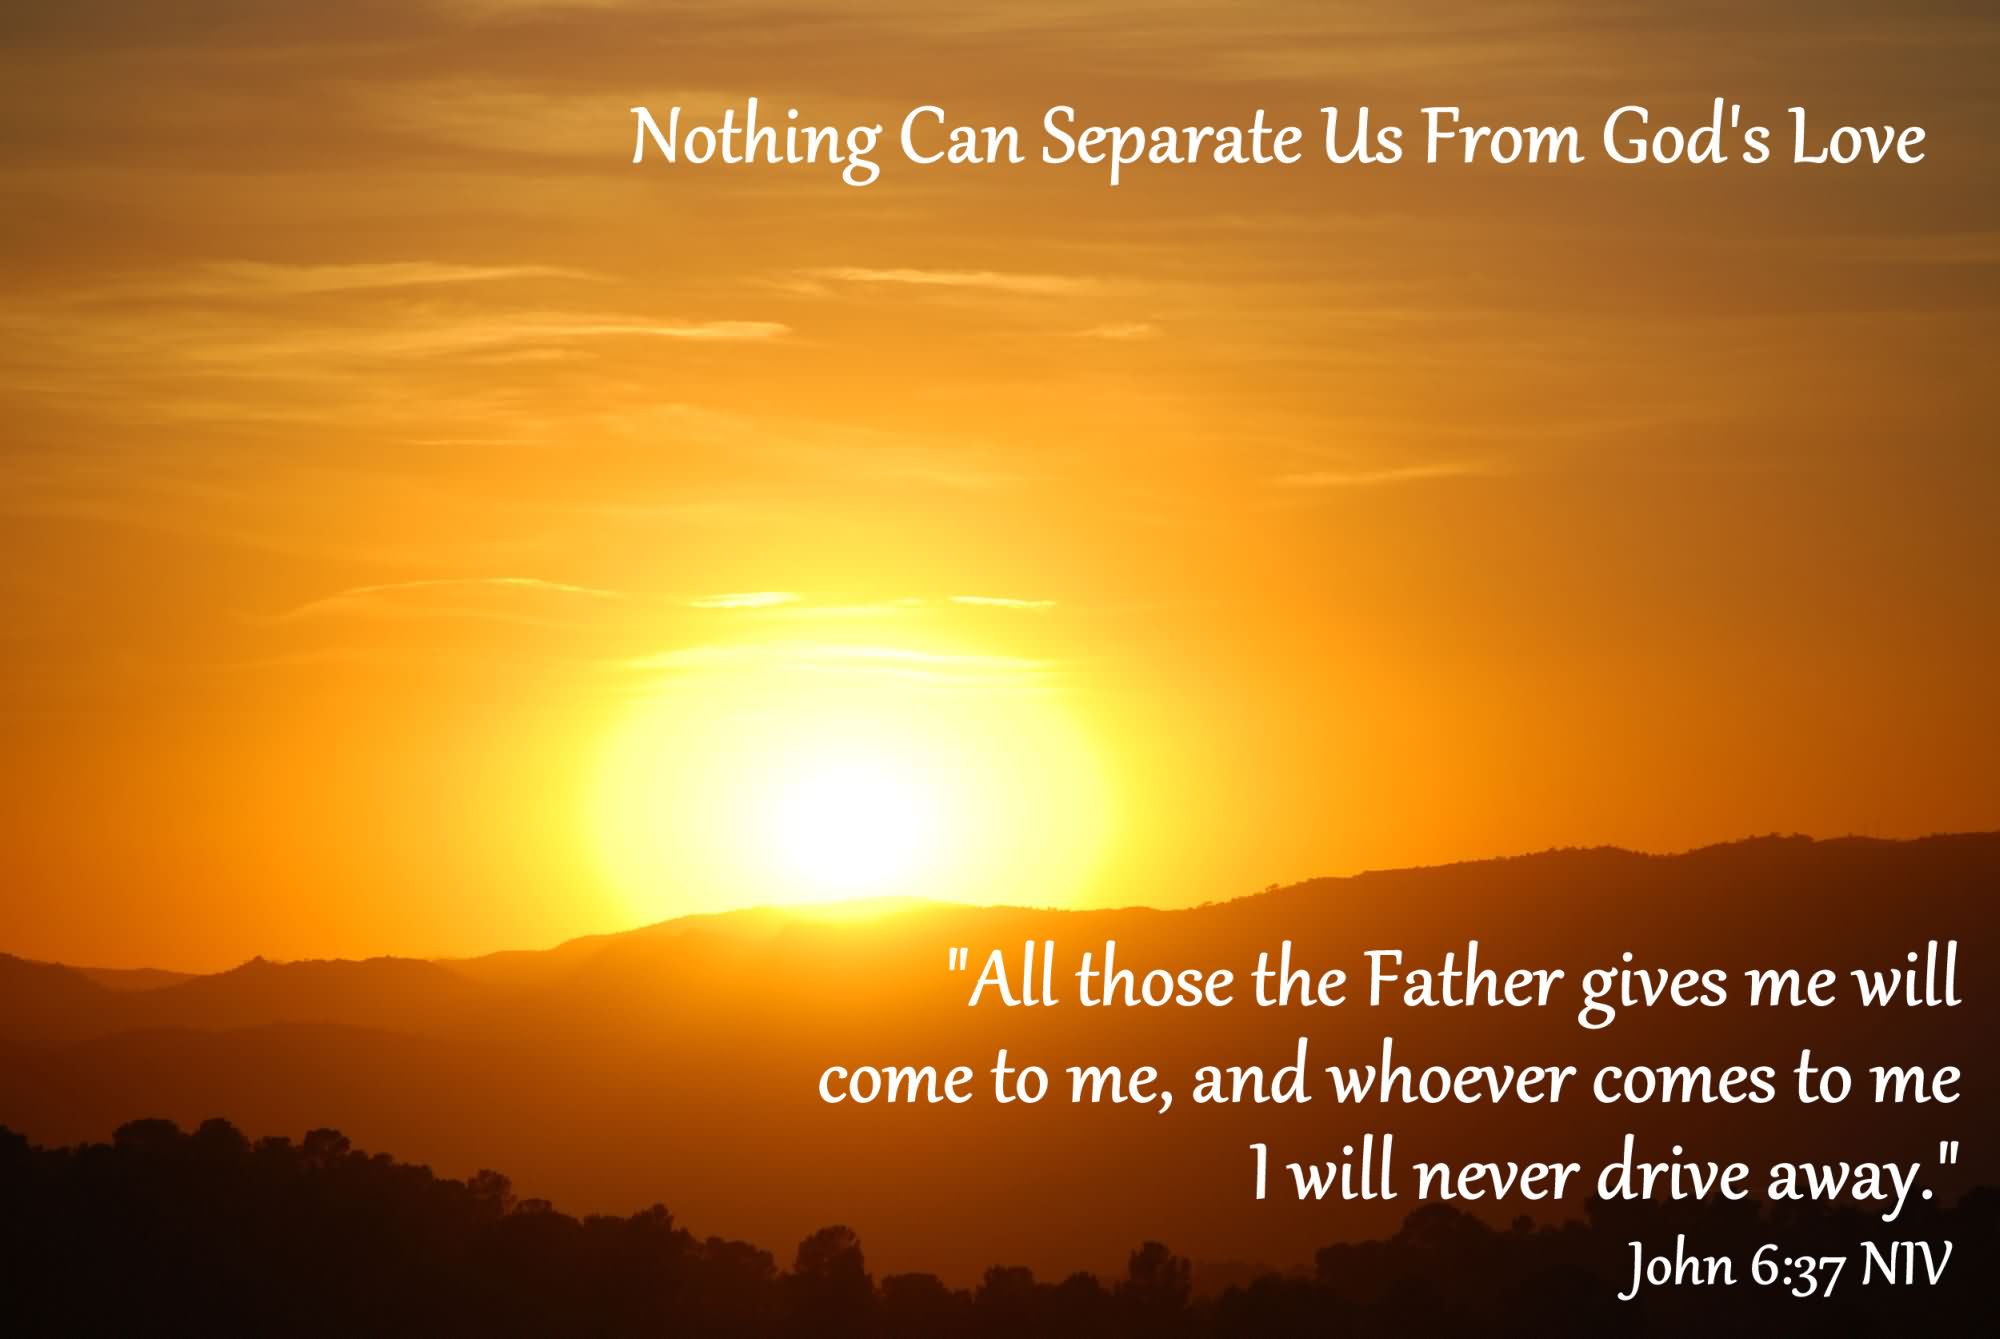 nothing-can-separate-us-from-gods-love-all-those-the-father-gives-me-will-come-to-me-organization-quote